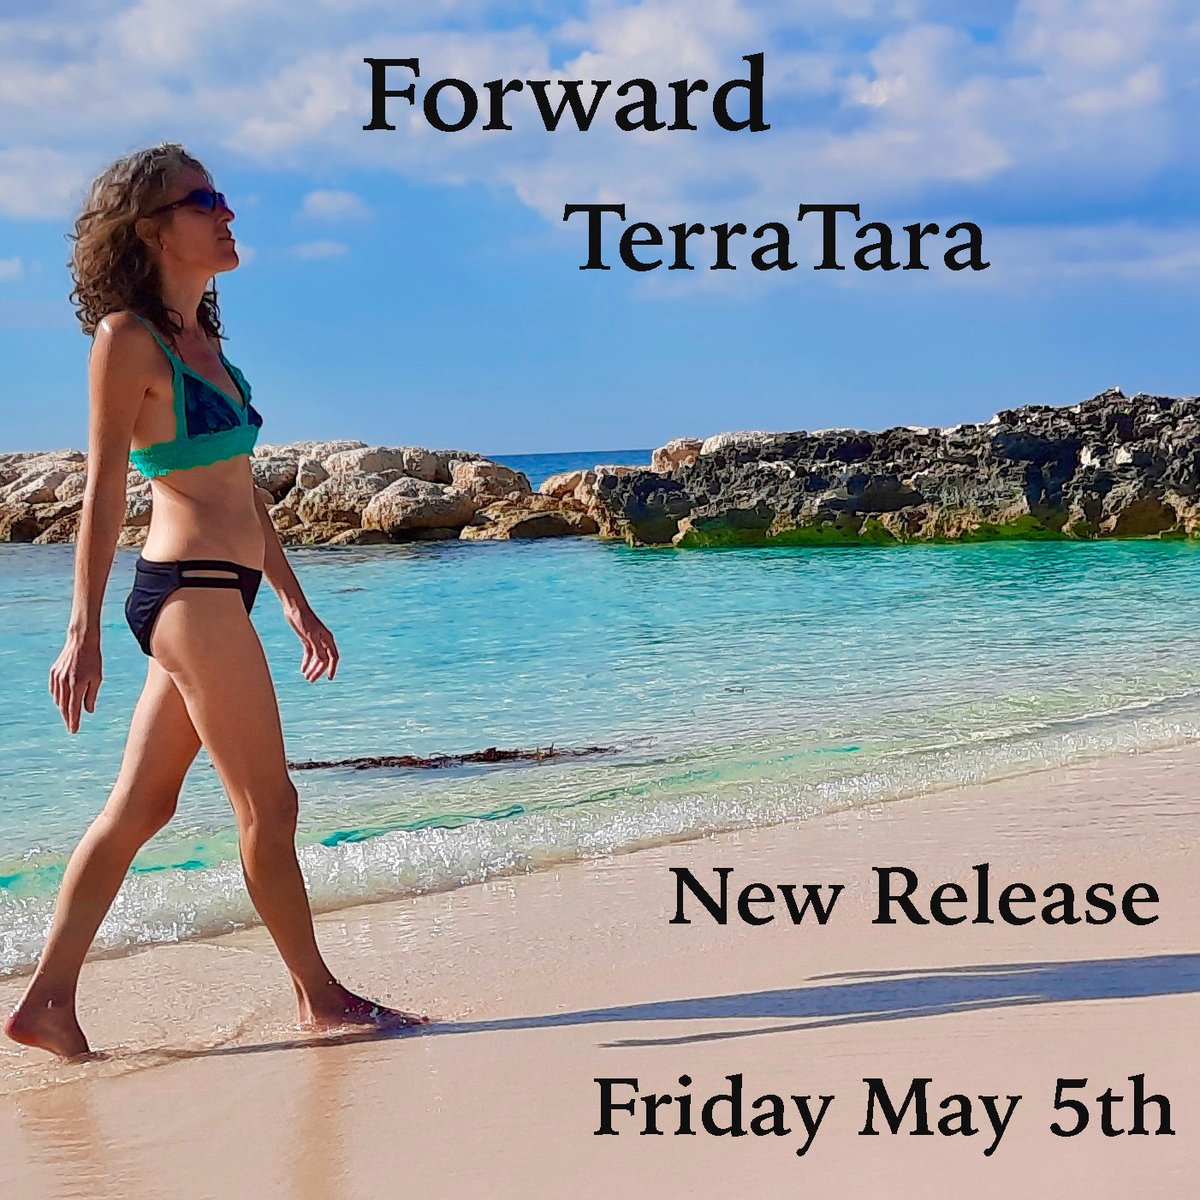 Looking Forward to sharing with you all!!! 🥳 'FORWARD' Releases, MAY 5TH! #terrataramusic #terrratara #music #musicproducer #musician #newtrack #newmusic #newsong #newrelease #vocalist #femalevocals #femalemusician #artist #singer #singersongwriter #songwriter #song